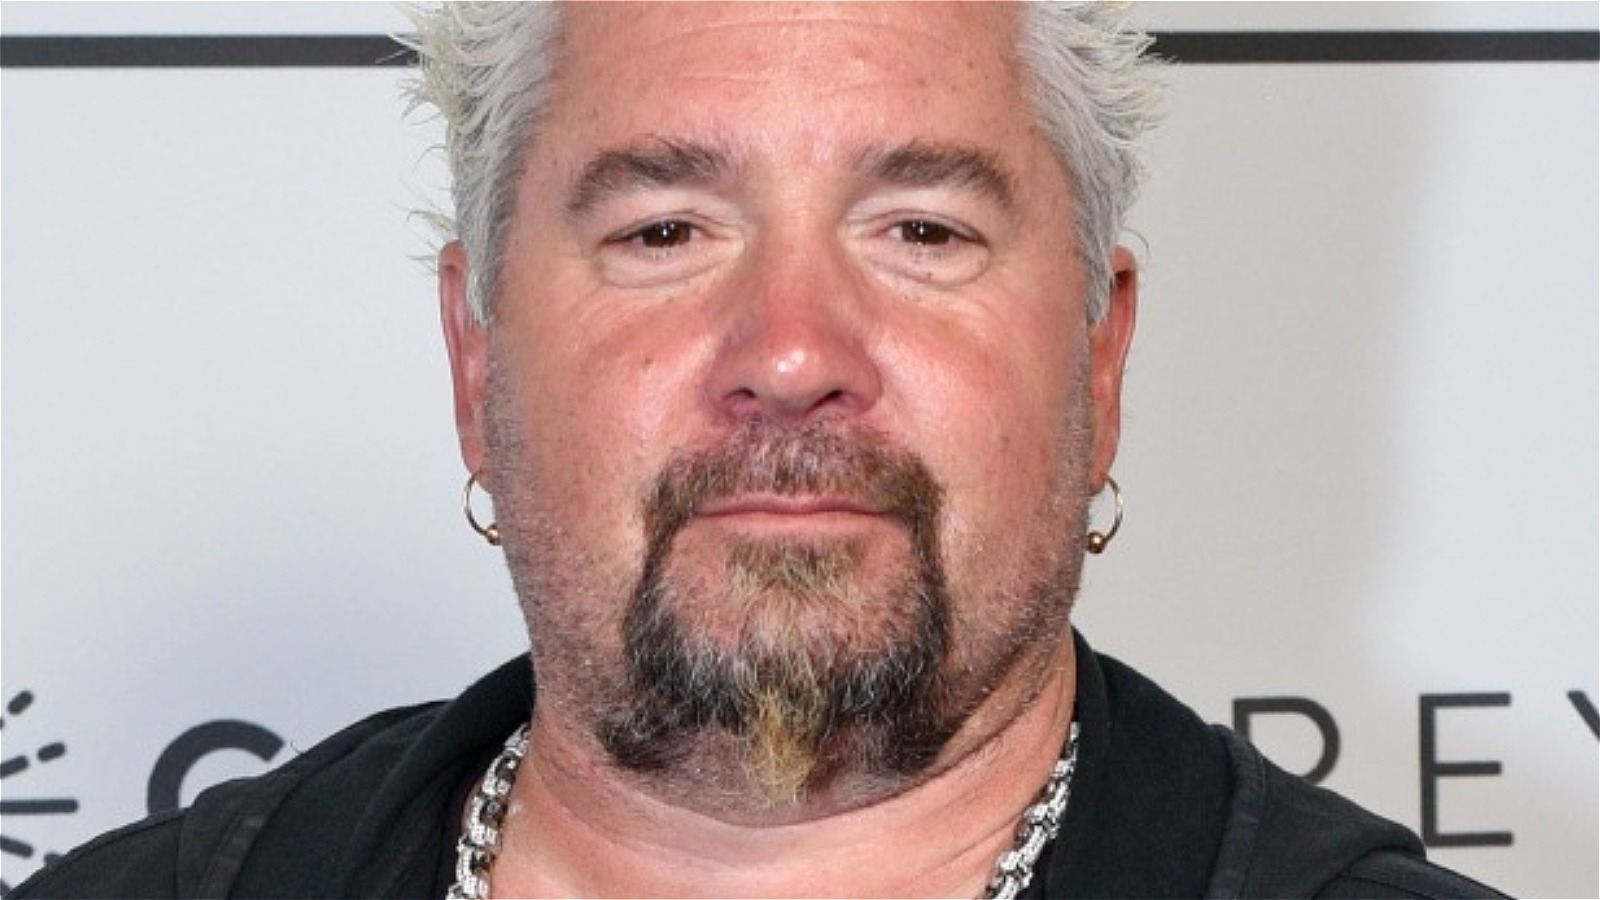 Guy Fieri's Late Late Show Appearance Has The Internet Seeing Triple.